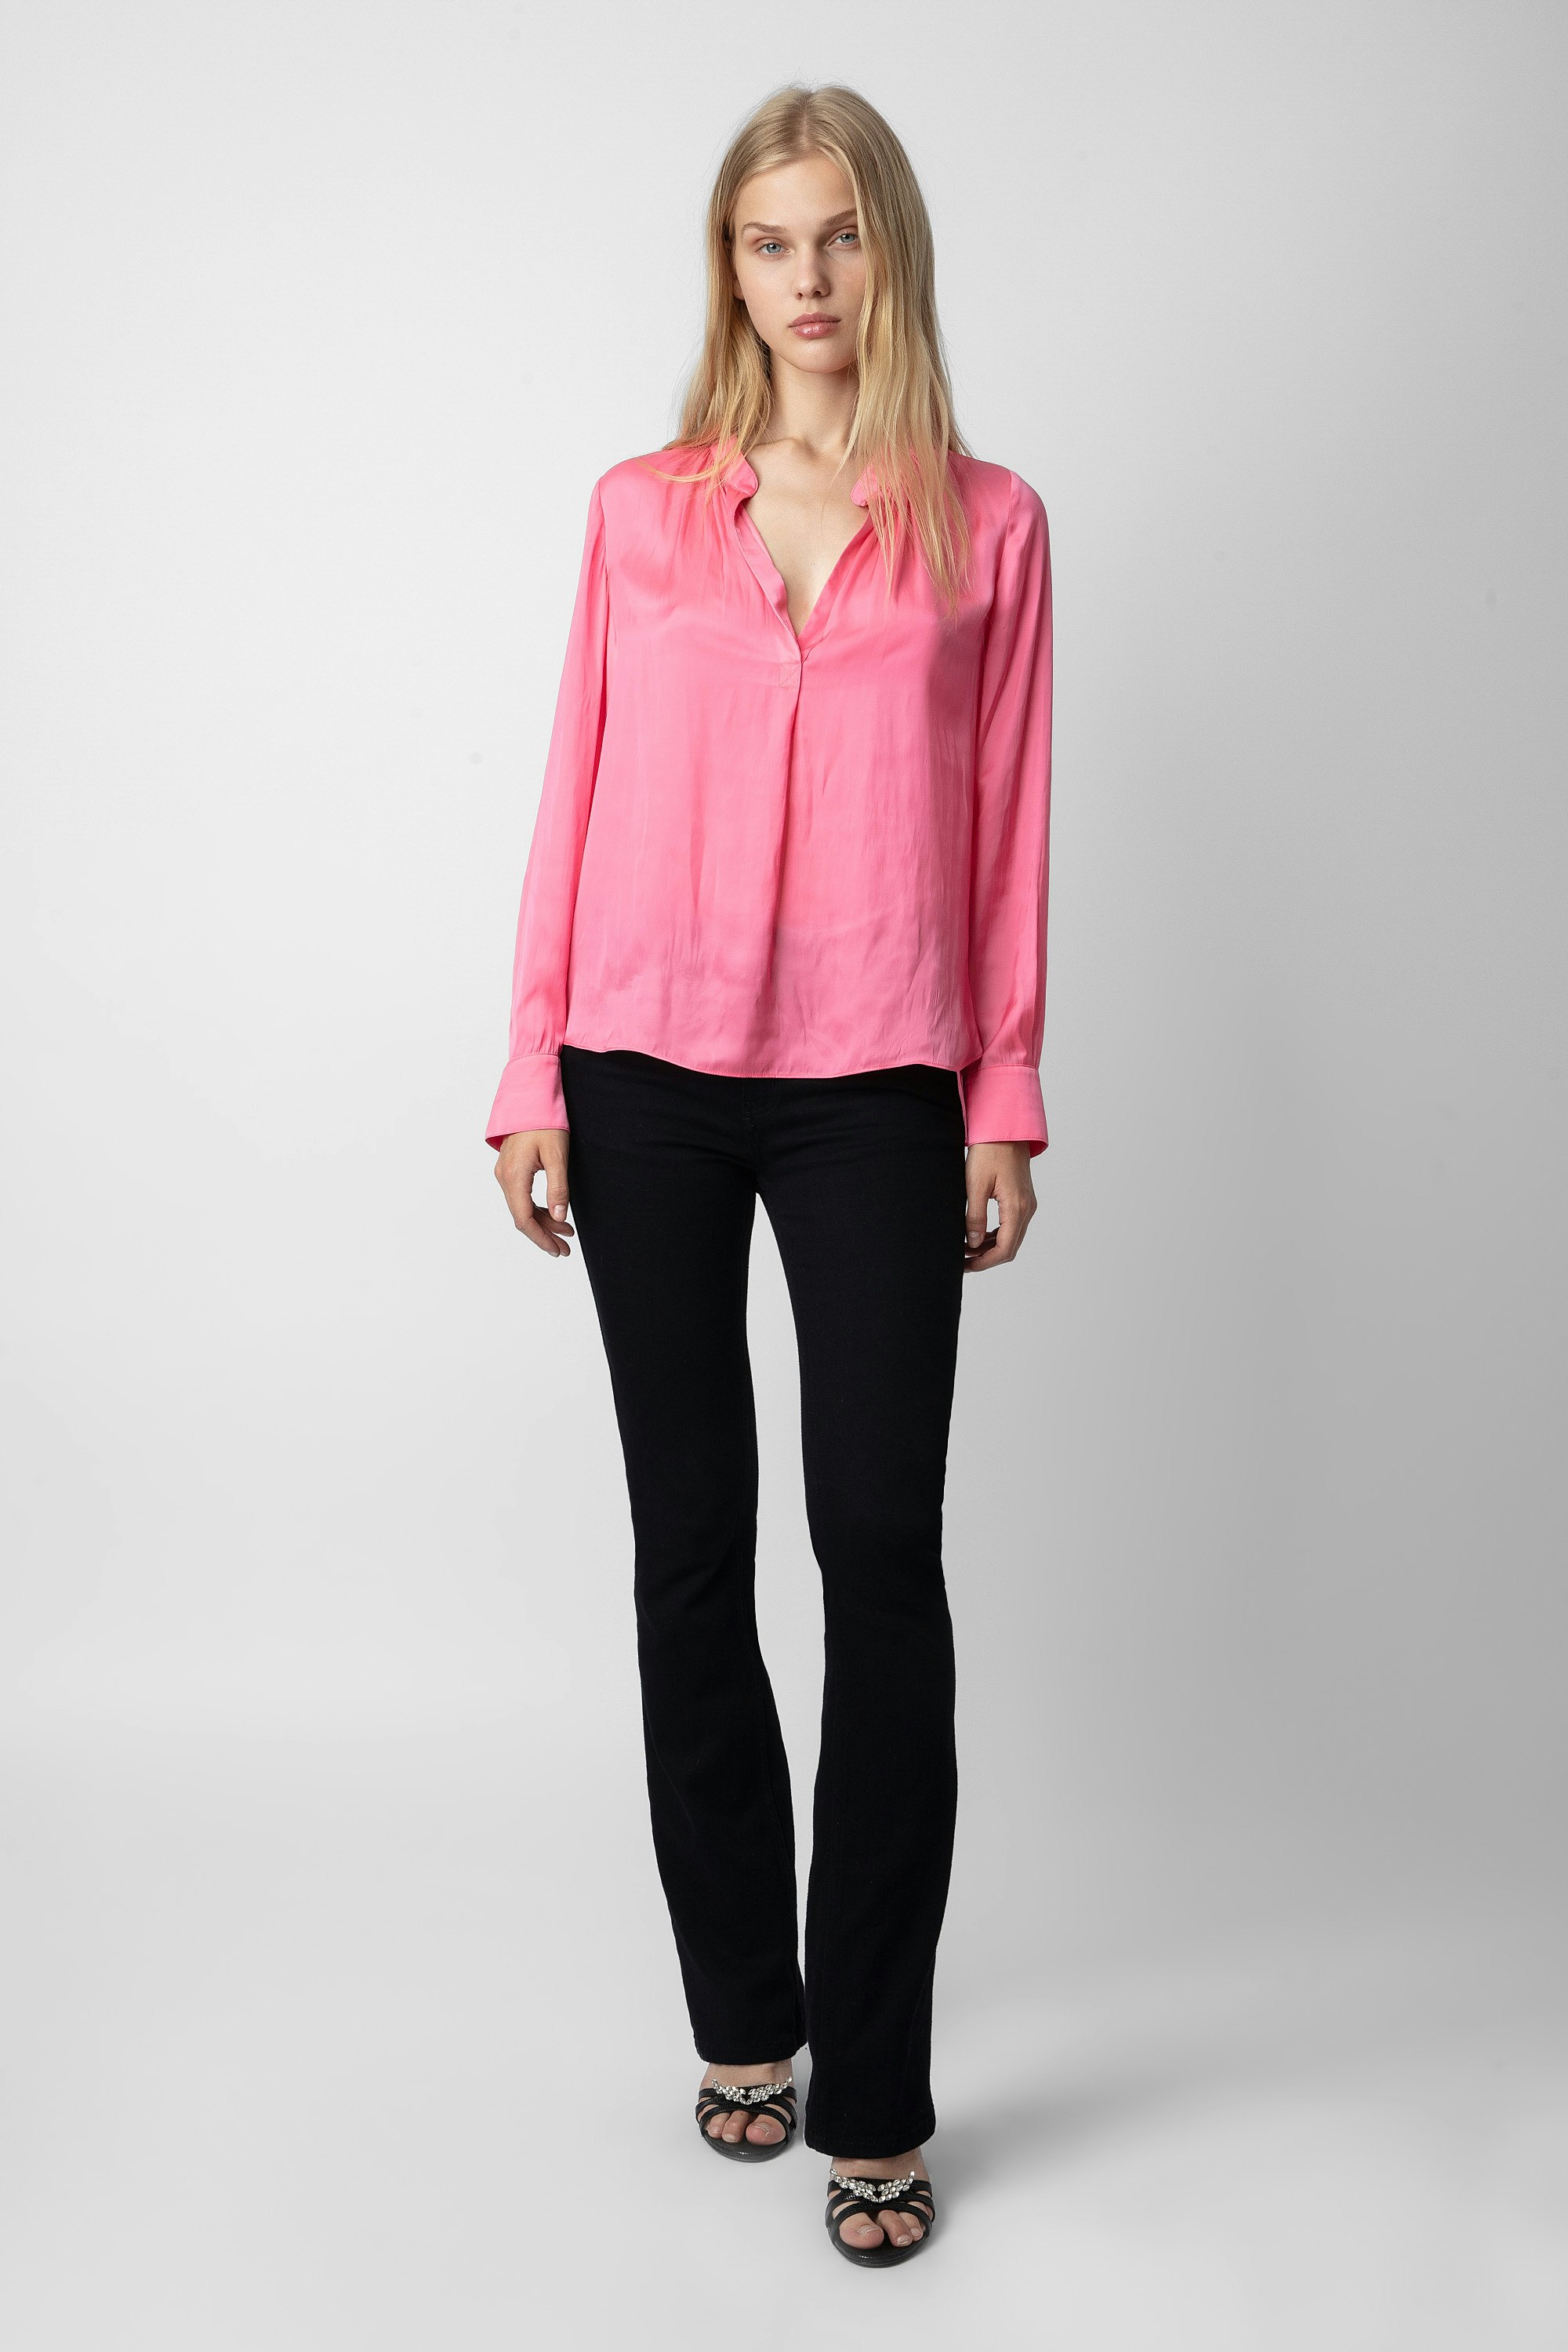 Tink Satin Blouse - Women’s pink blouse with open collar.